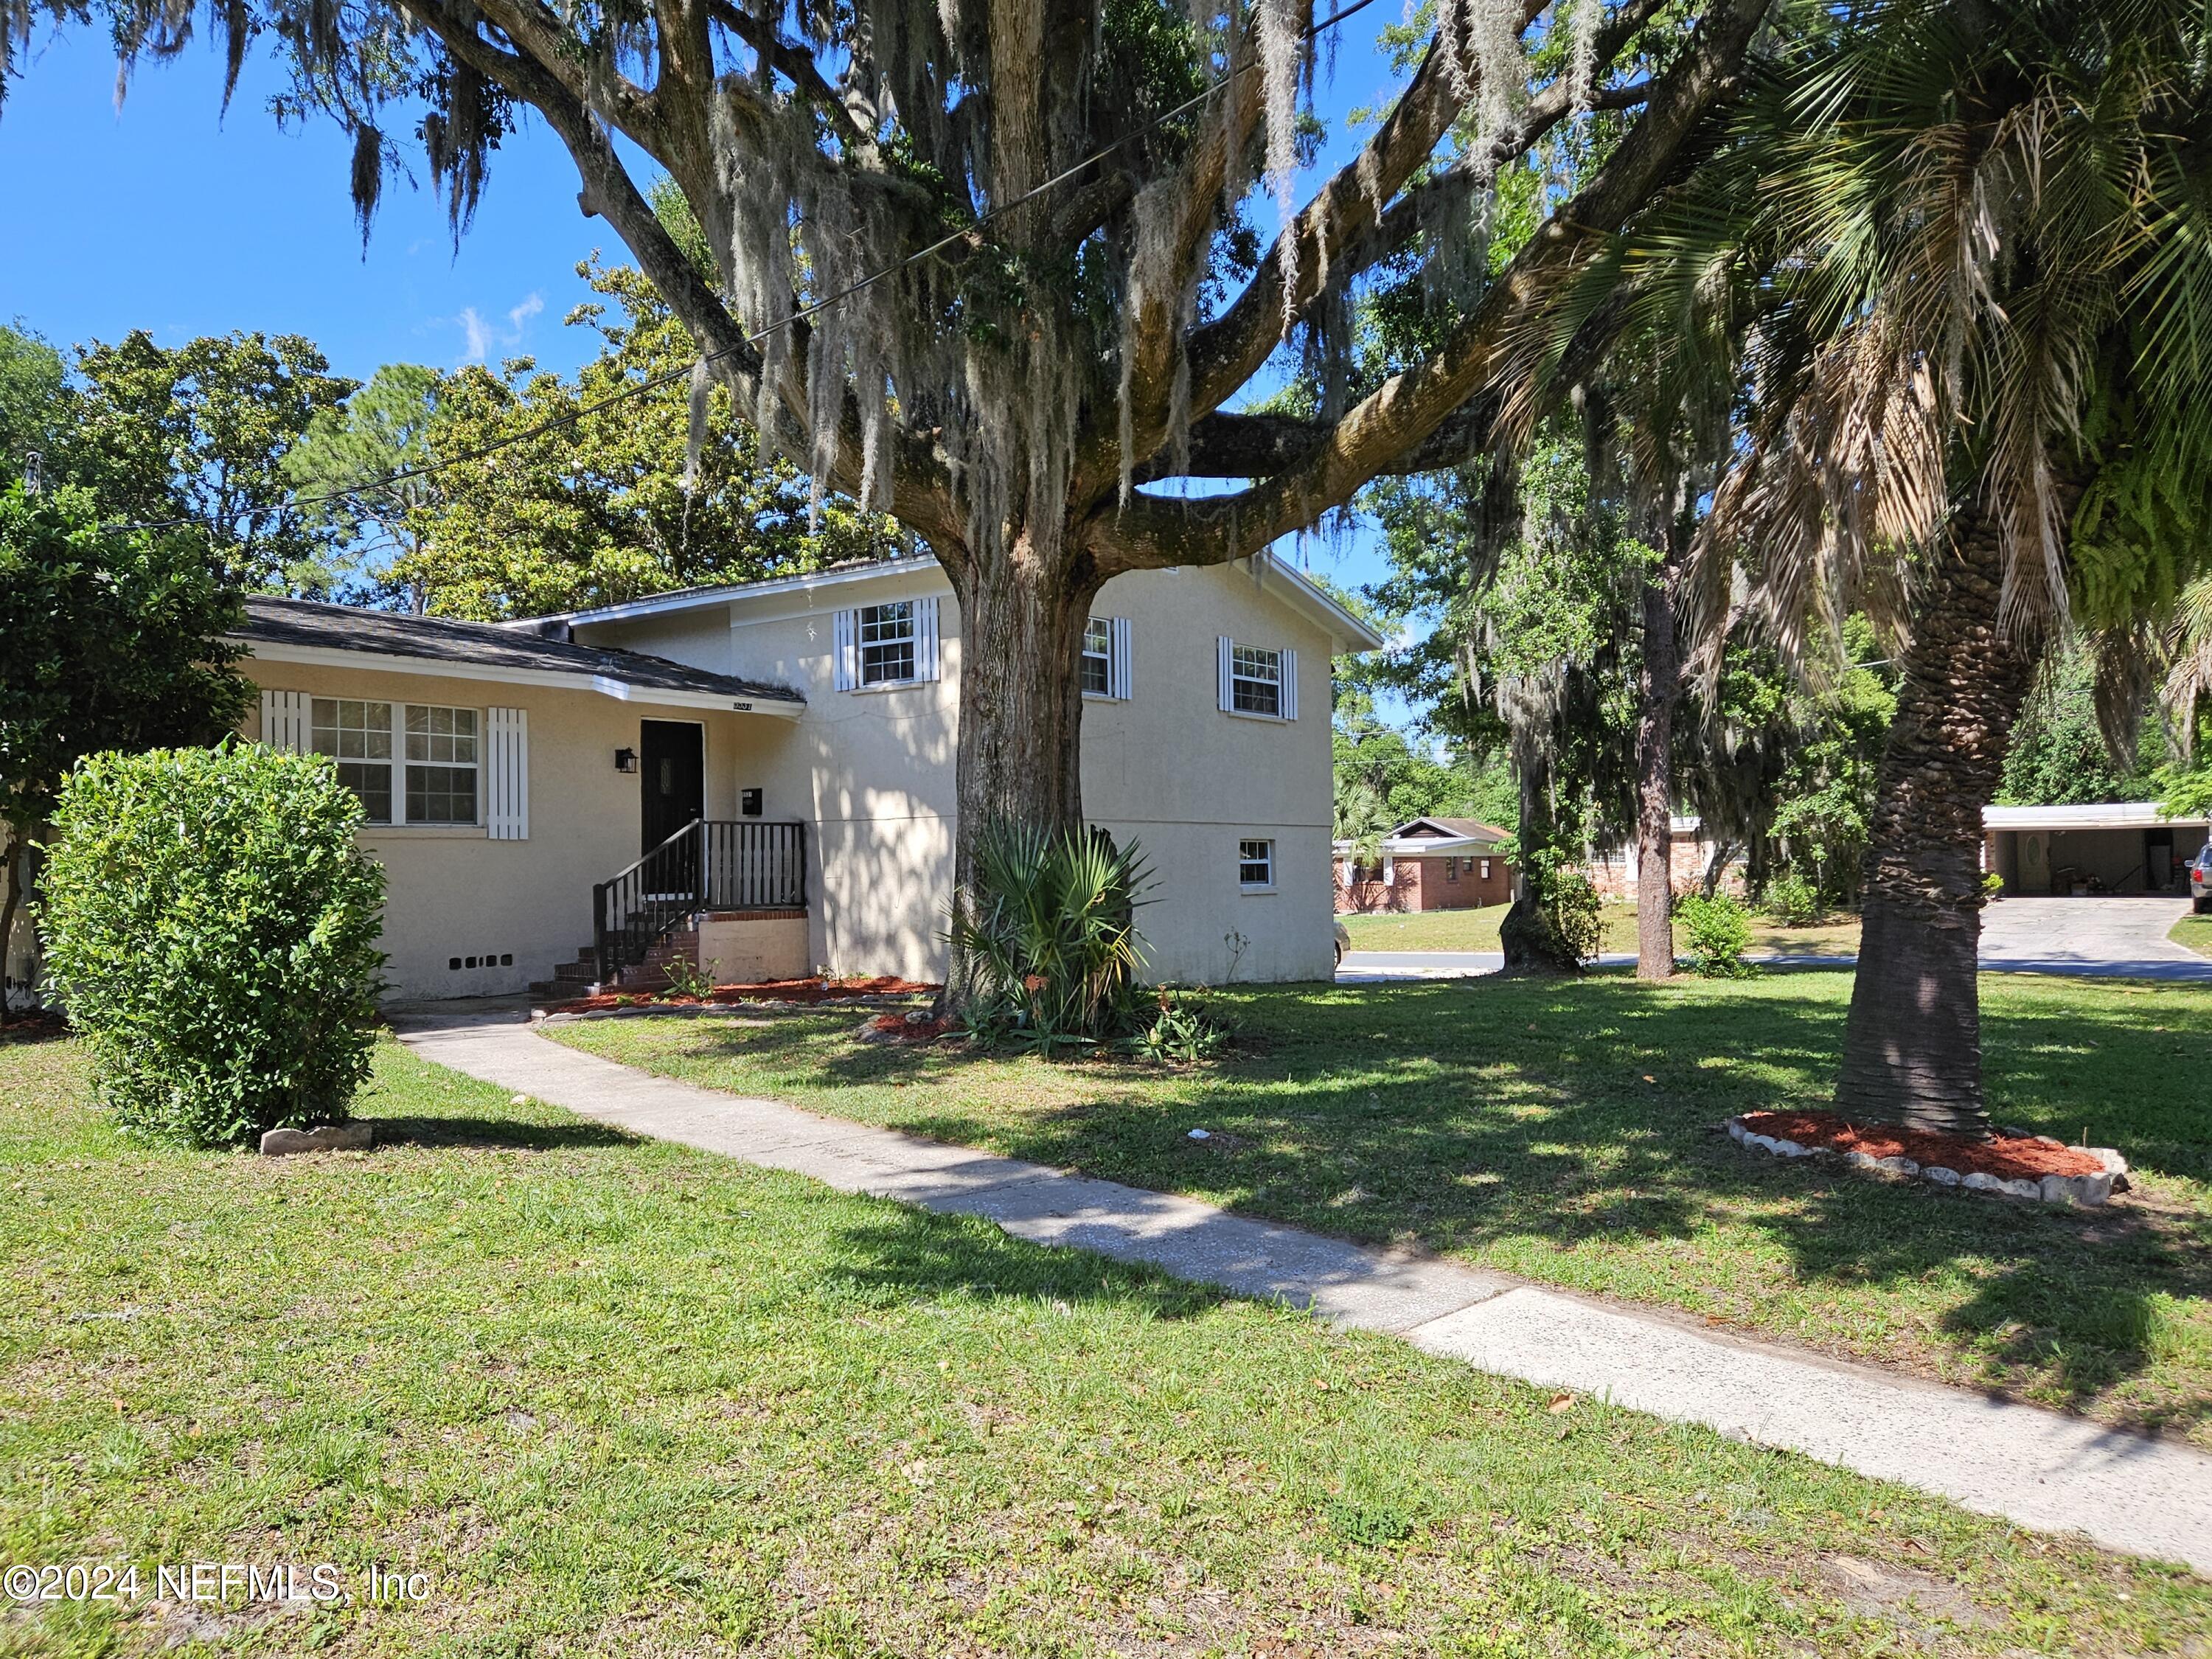 Jacksonville, FL home for sale located at 5531 Ghormley Road, Jacksonville, FL 32277